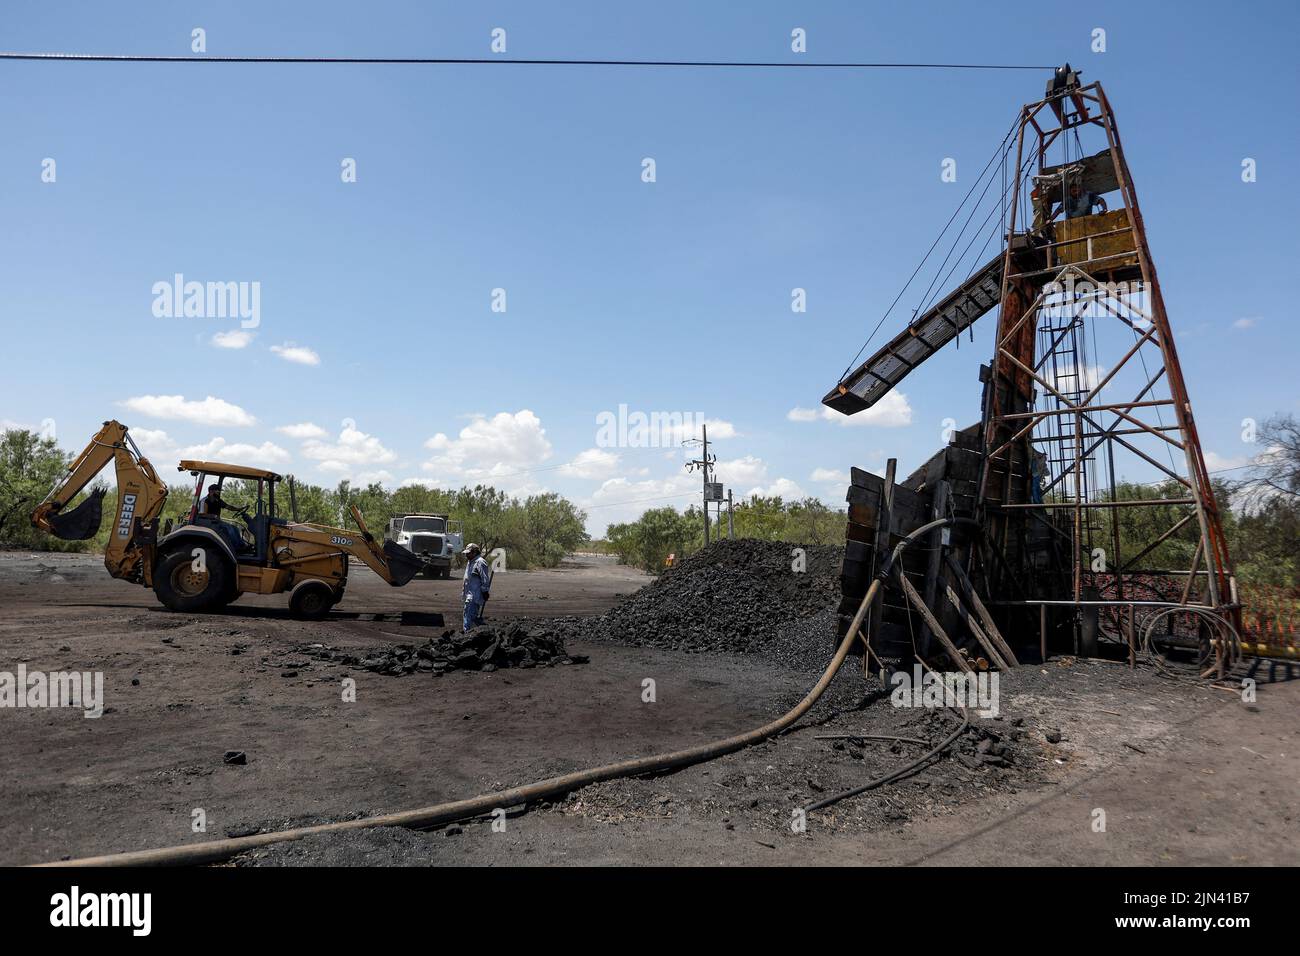 A general view shows an artisanal coal mine, or 'pocito' (little hole), known for their rudimentary and often dangerous mining techniques, in Sabinas, Coahuila state, Mexico, August 8, 2022. REUTERS/Luis Cortes Stock Photo